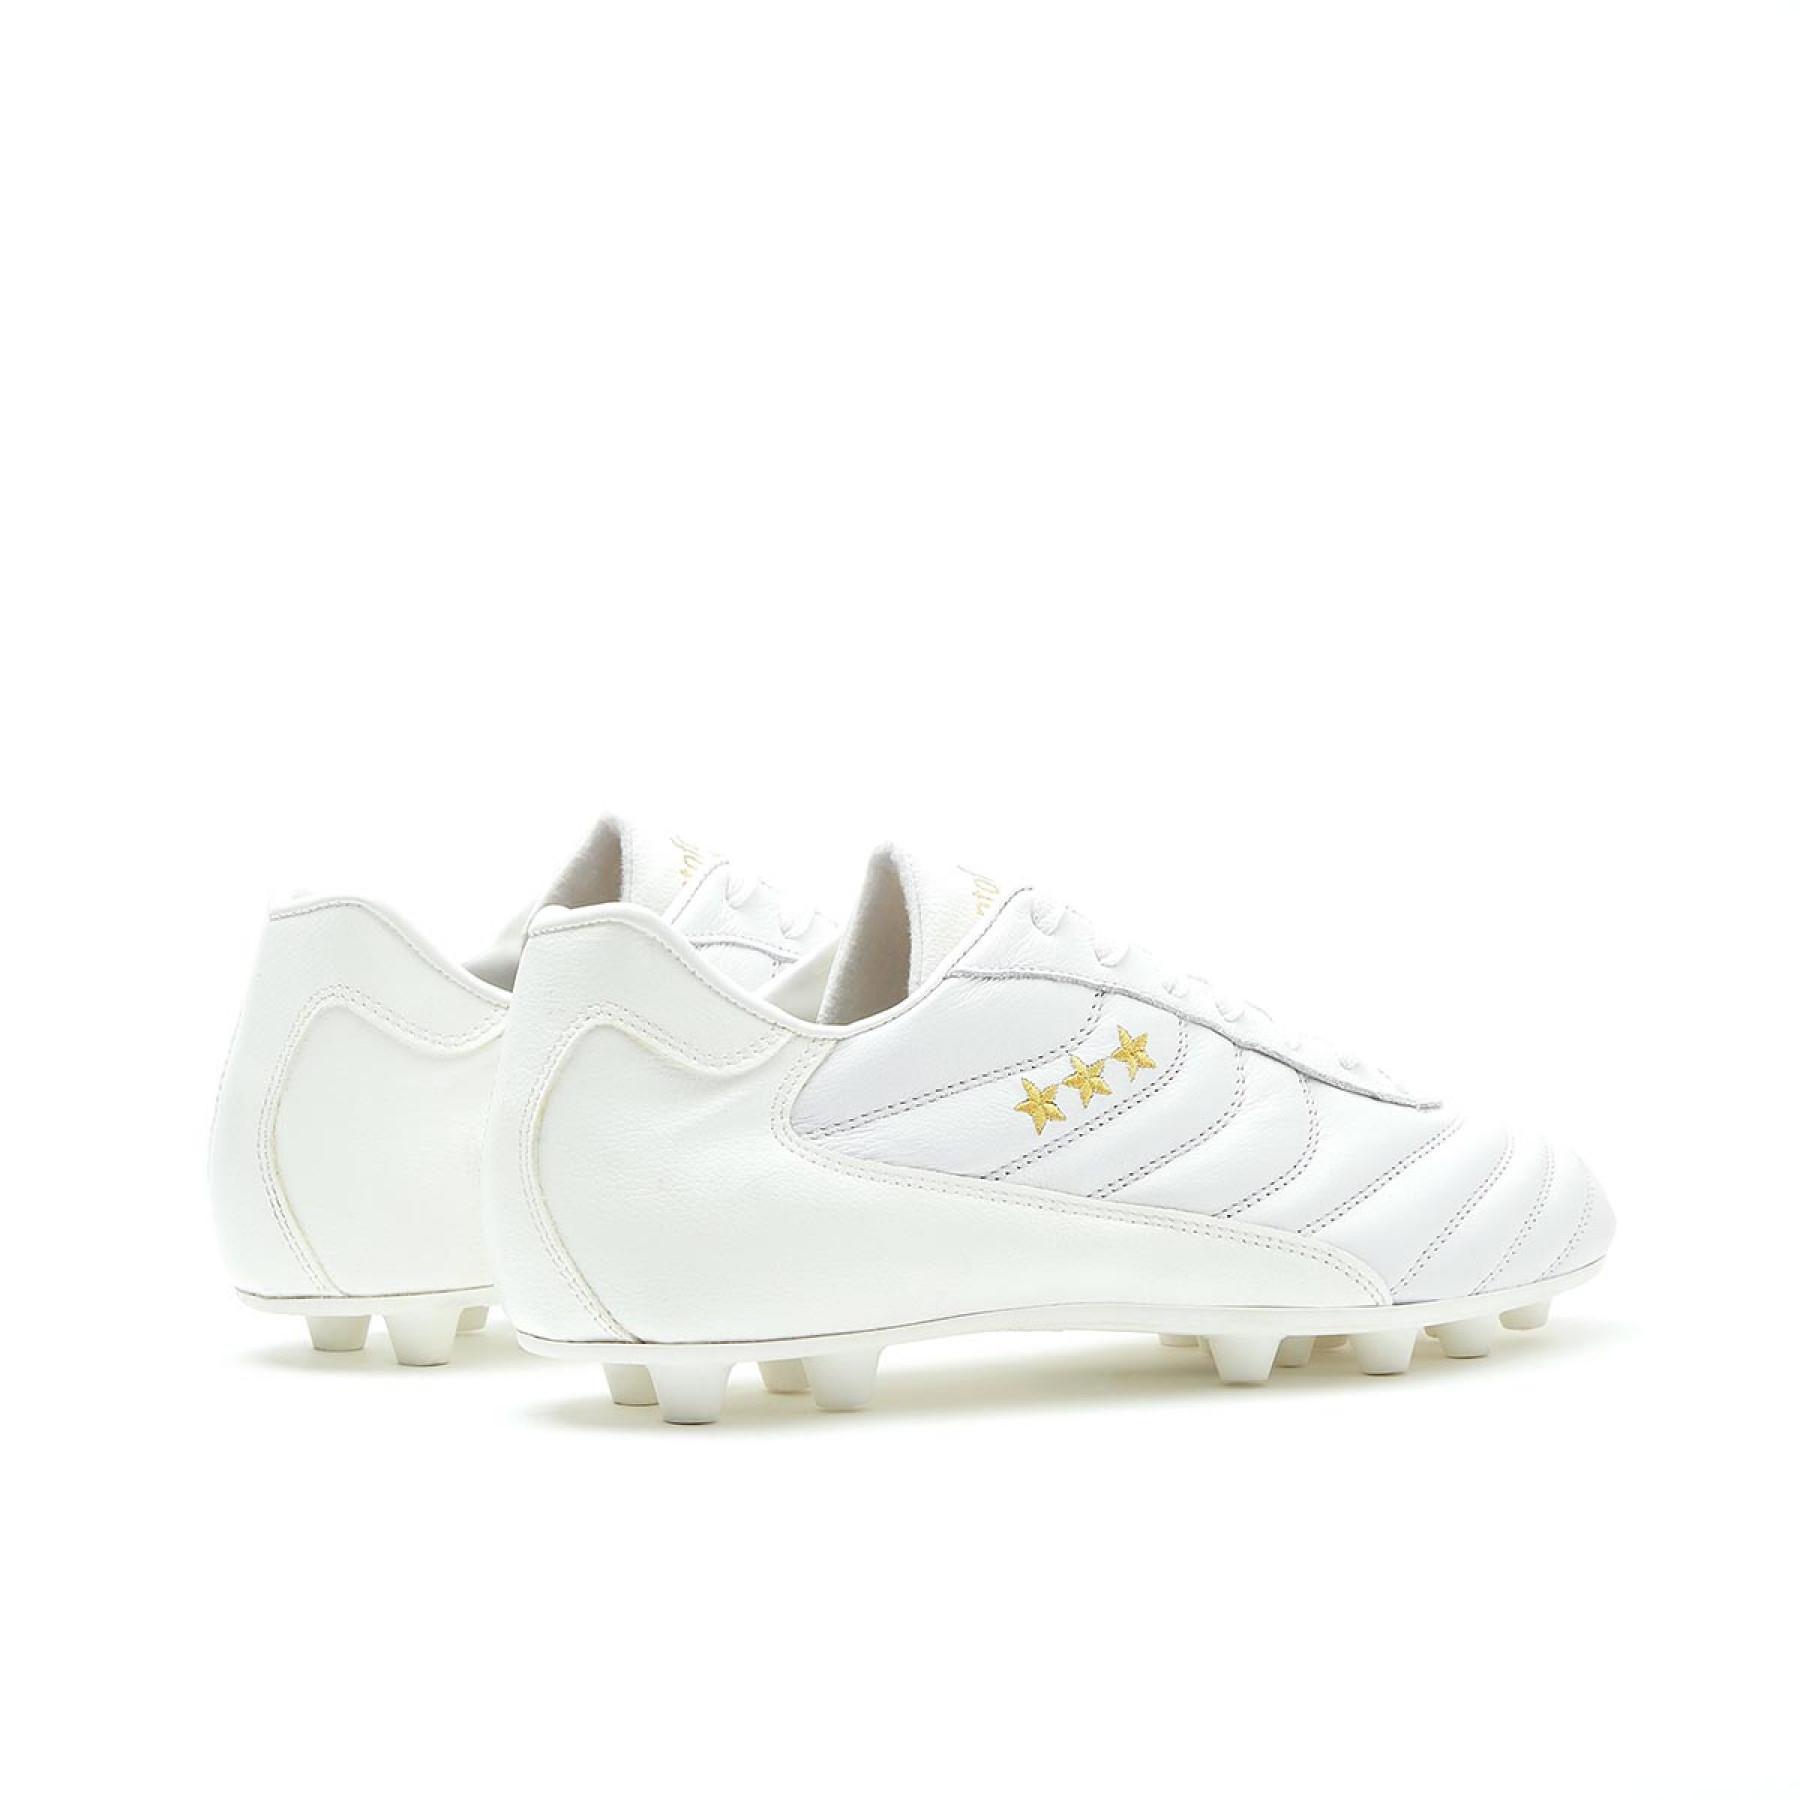 Chaussures de Football Pantofola D'Oro Derby Leather/Tech